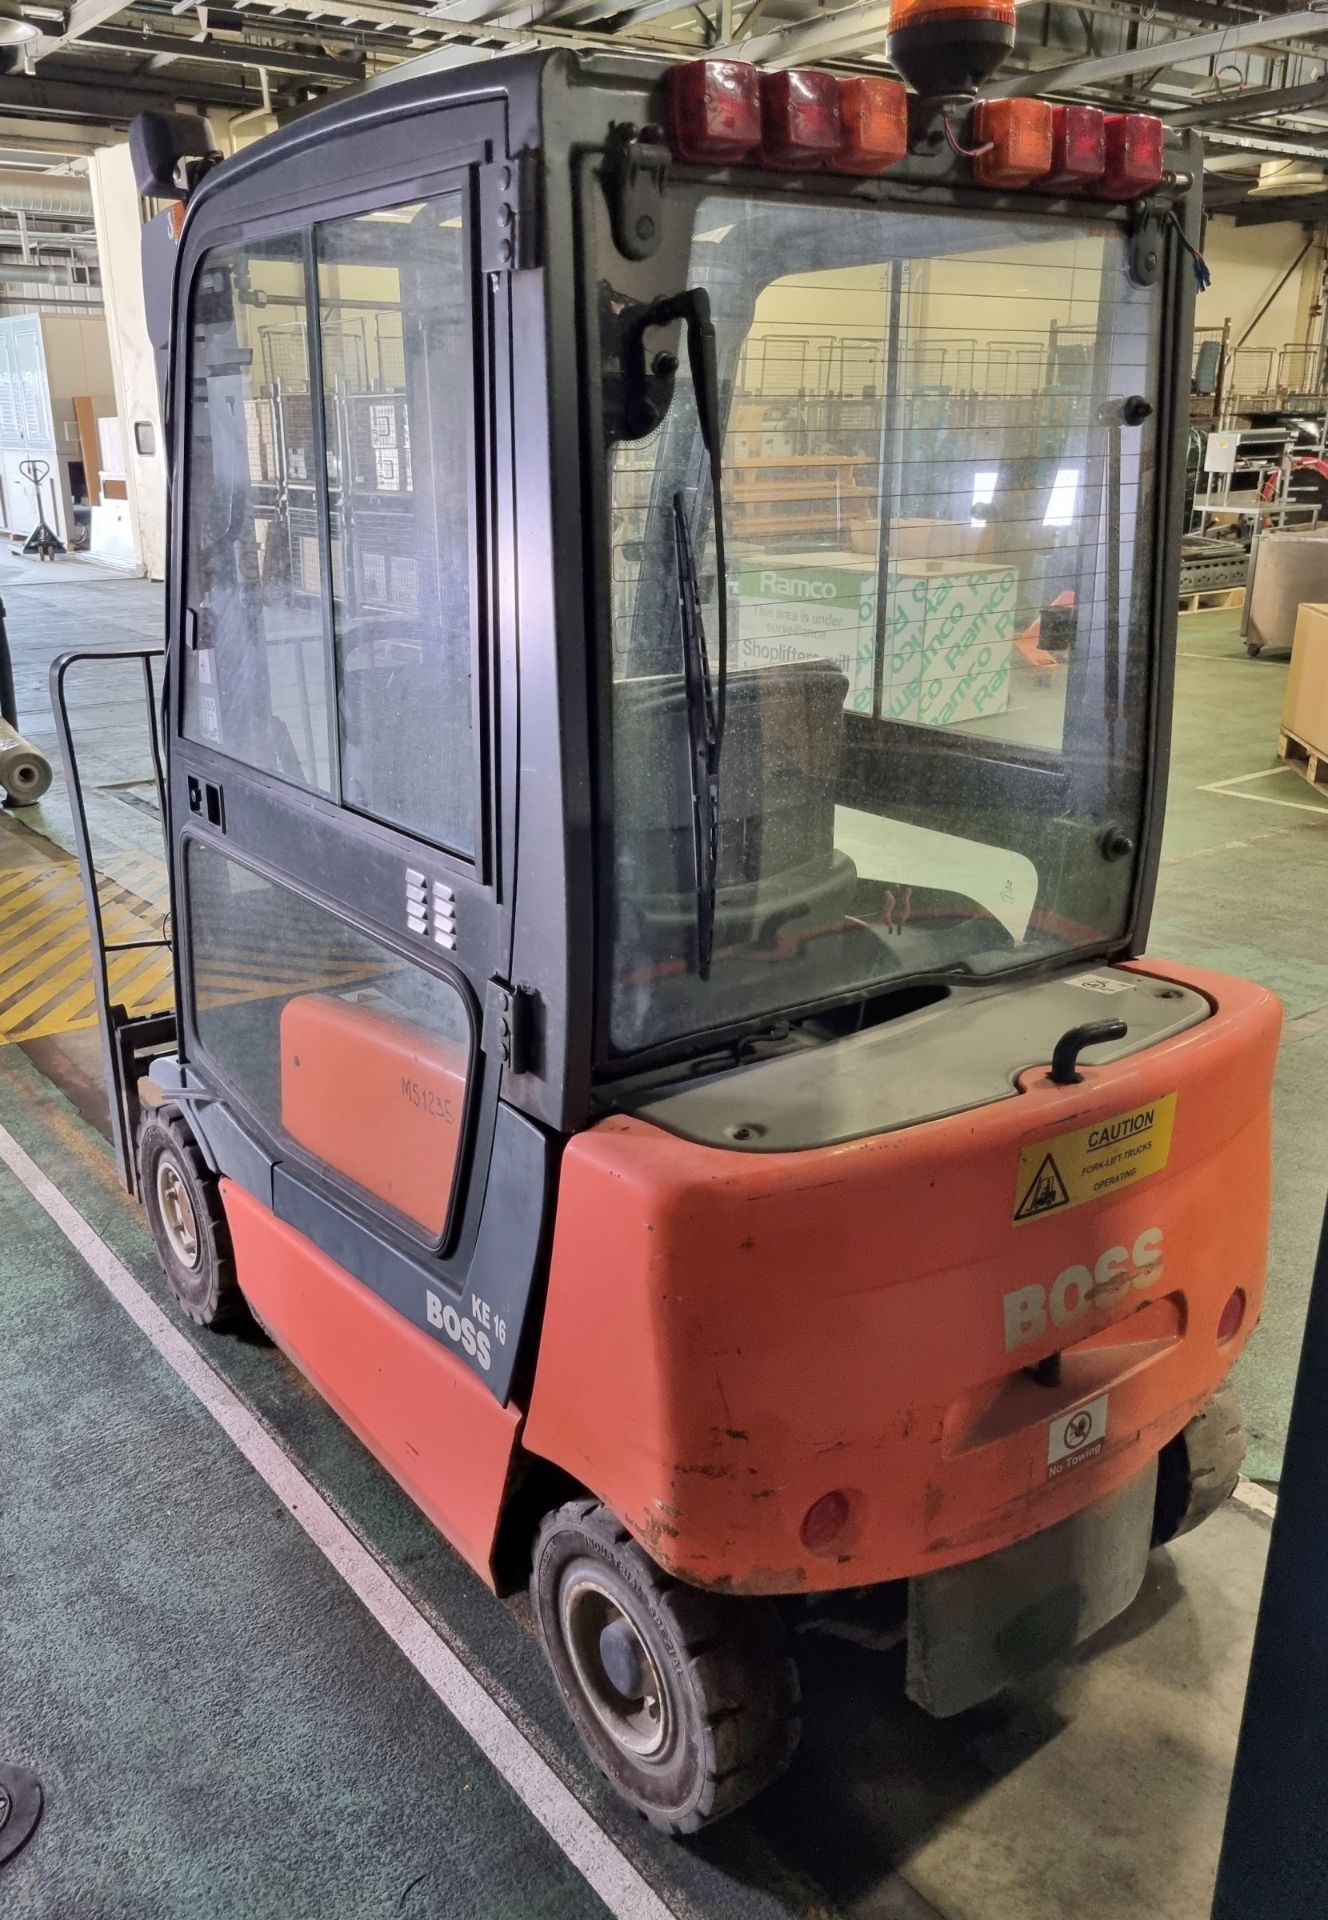 Steinbock Boss KE16 4 wheel electric forklift - L 2750 x W 1000 x H 2000mm - NEEDS NEW BATTERY - Image 6 of 24